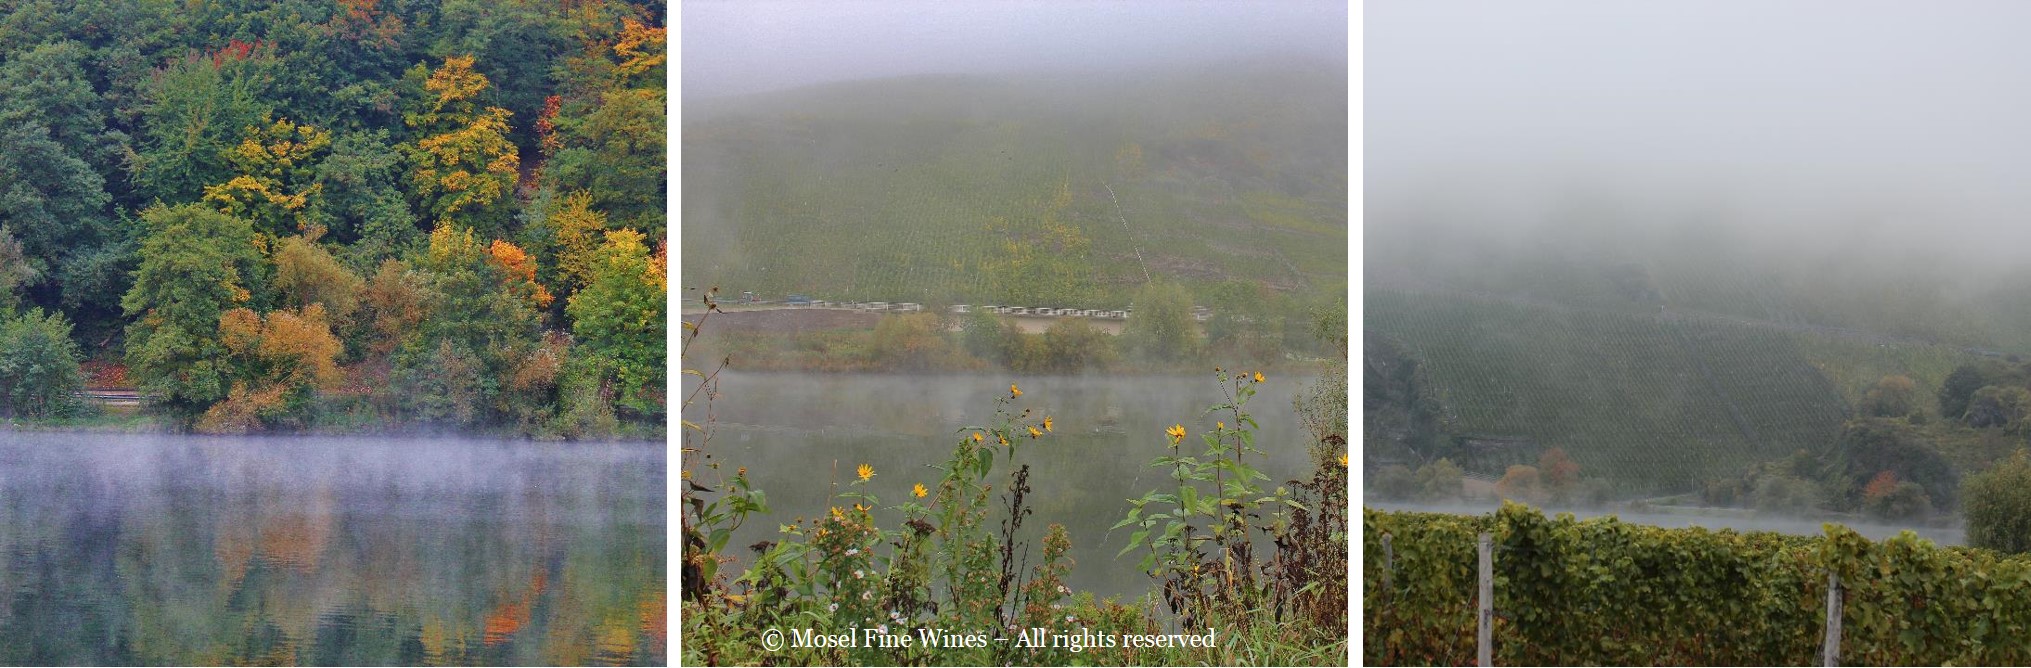 Mosel Harvest - Views of the River